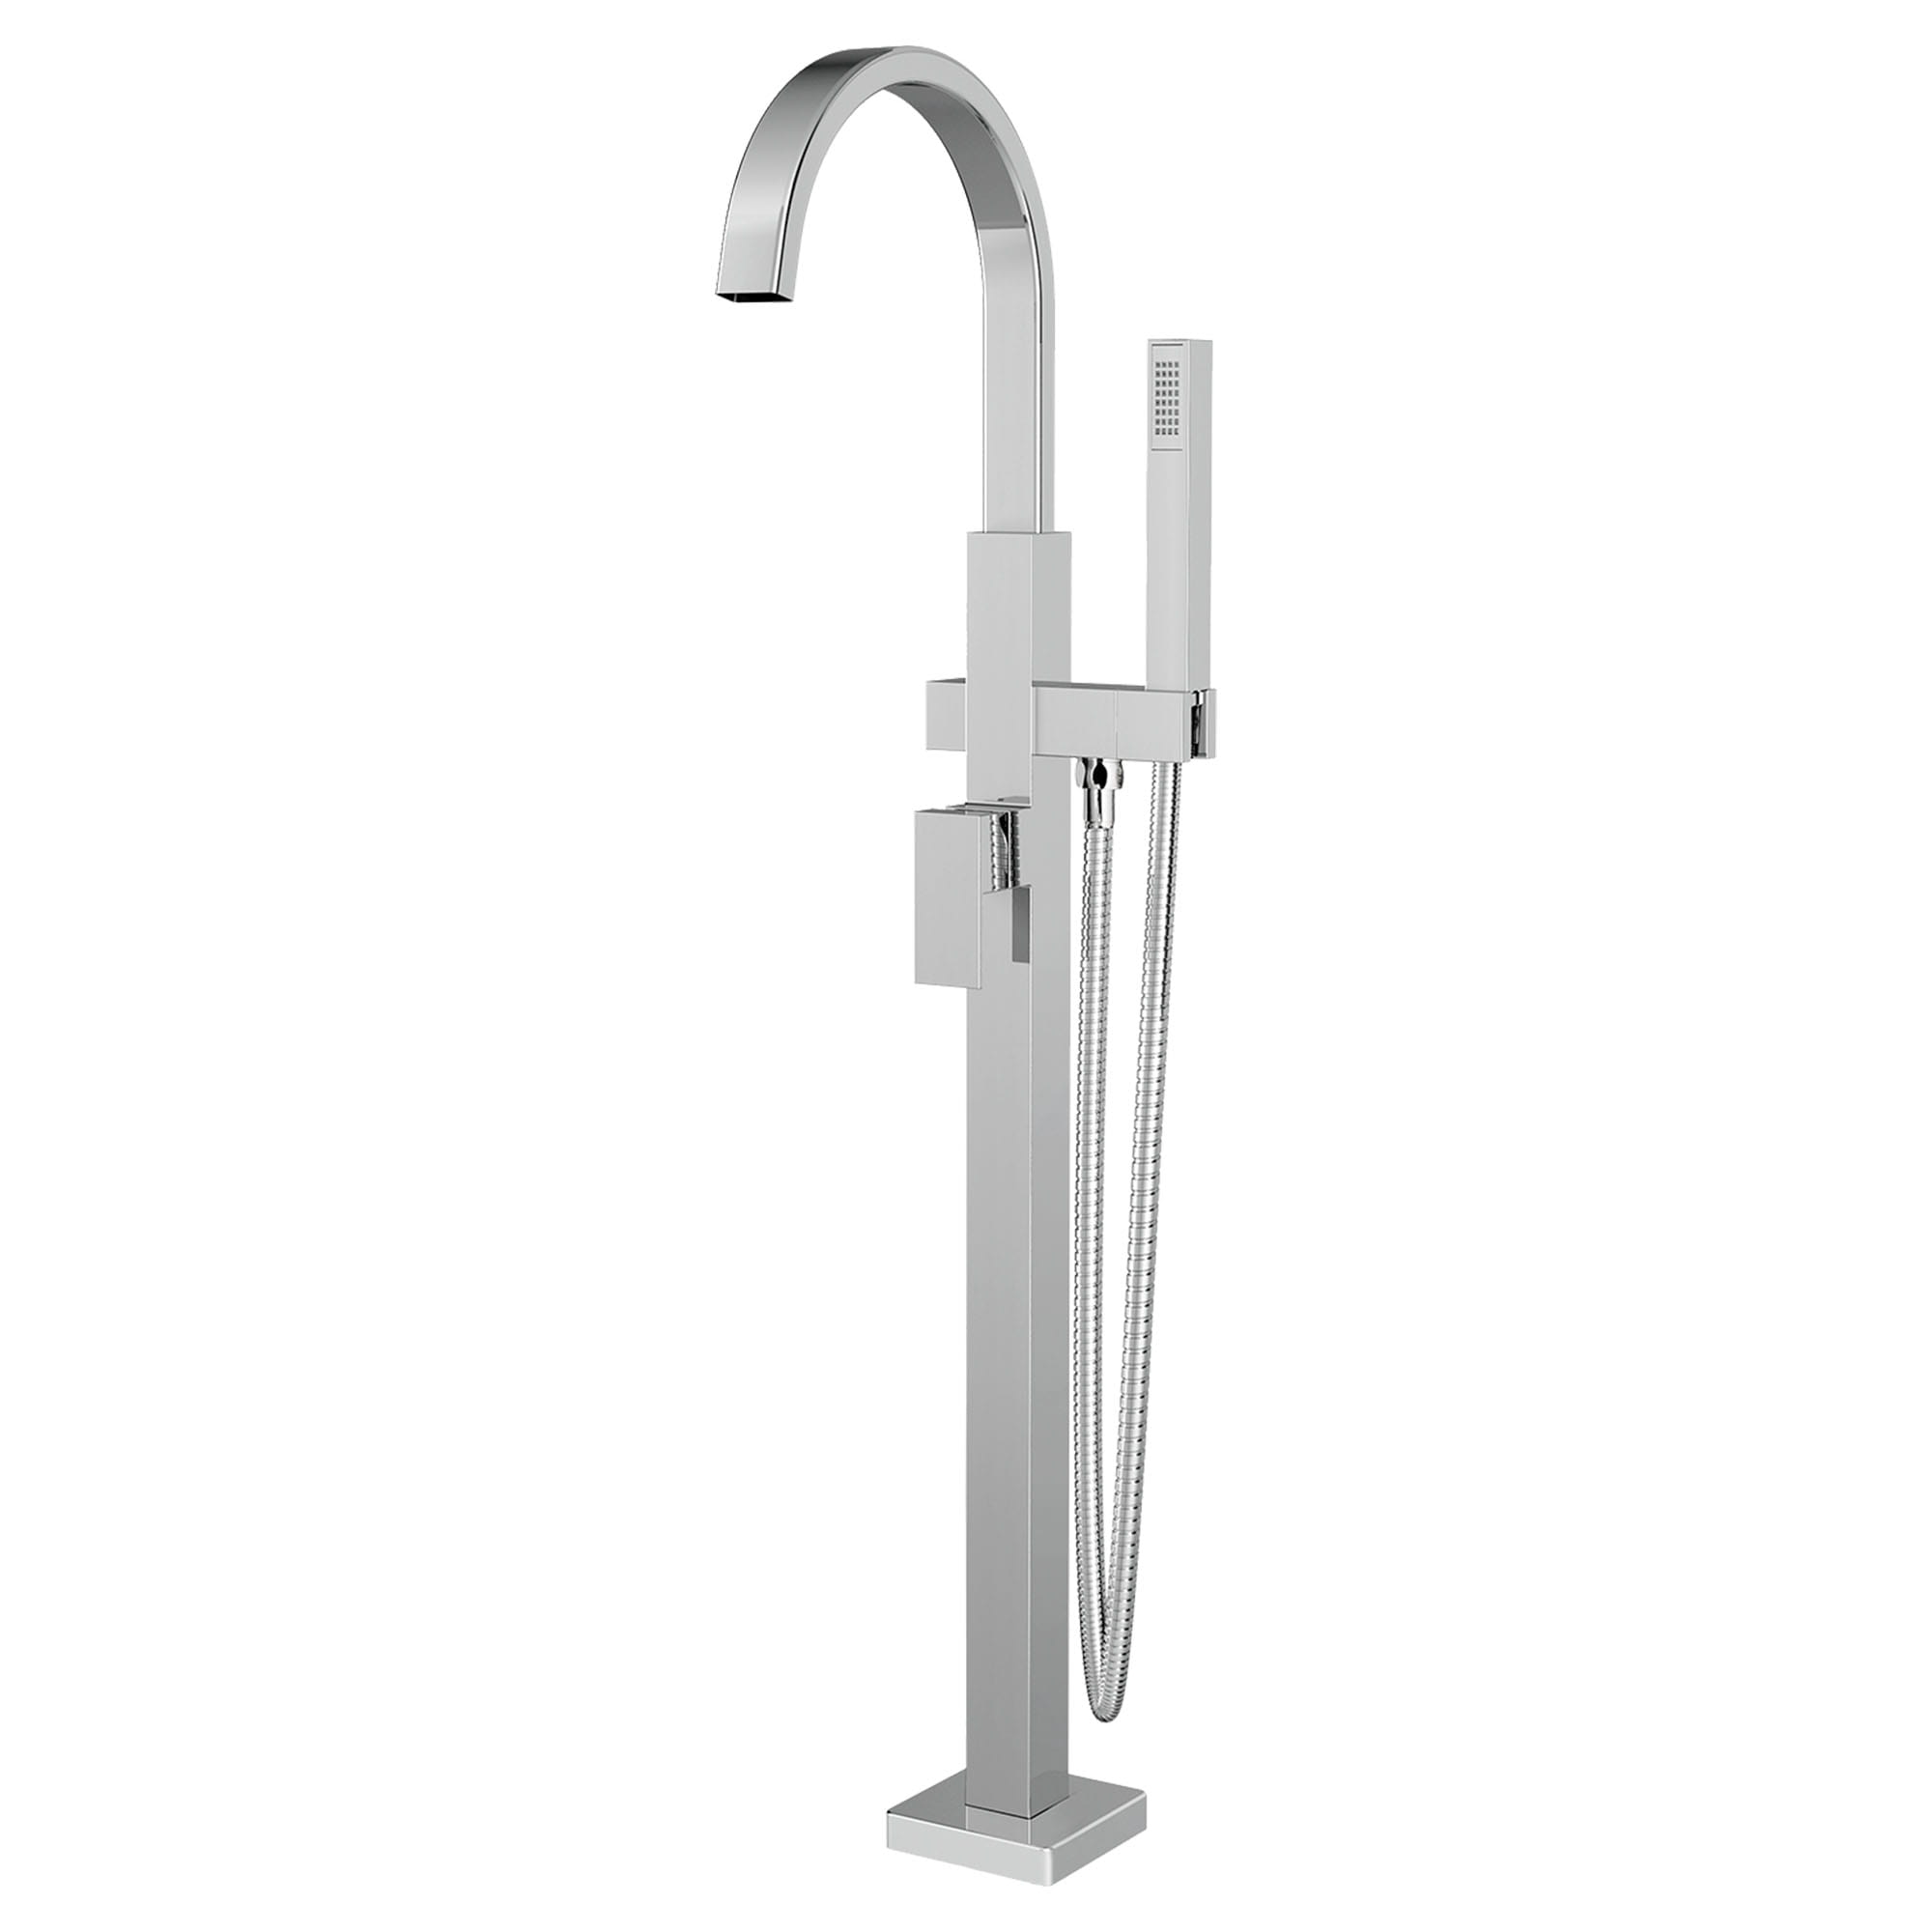 Contemporary Square Freestanding Bathtub Faucet With Lever Handle for Flash Rough In Valve CHROME